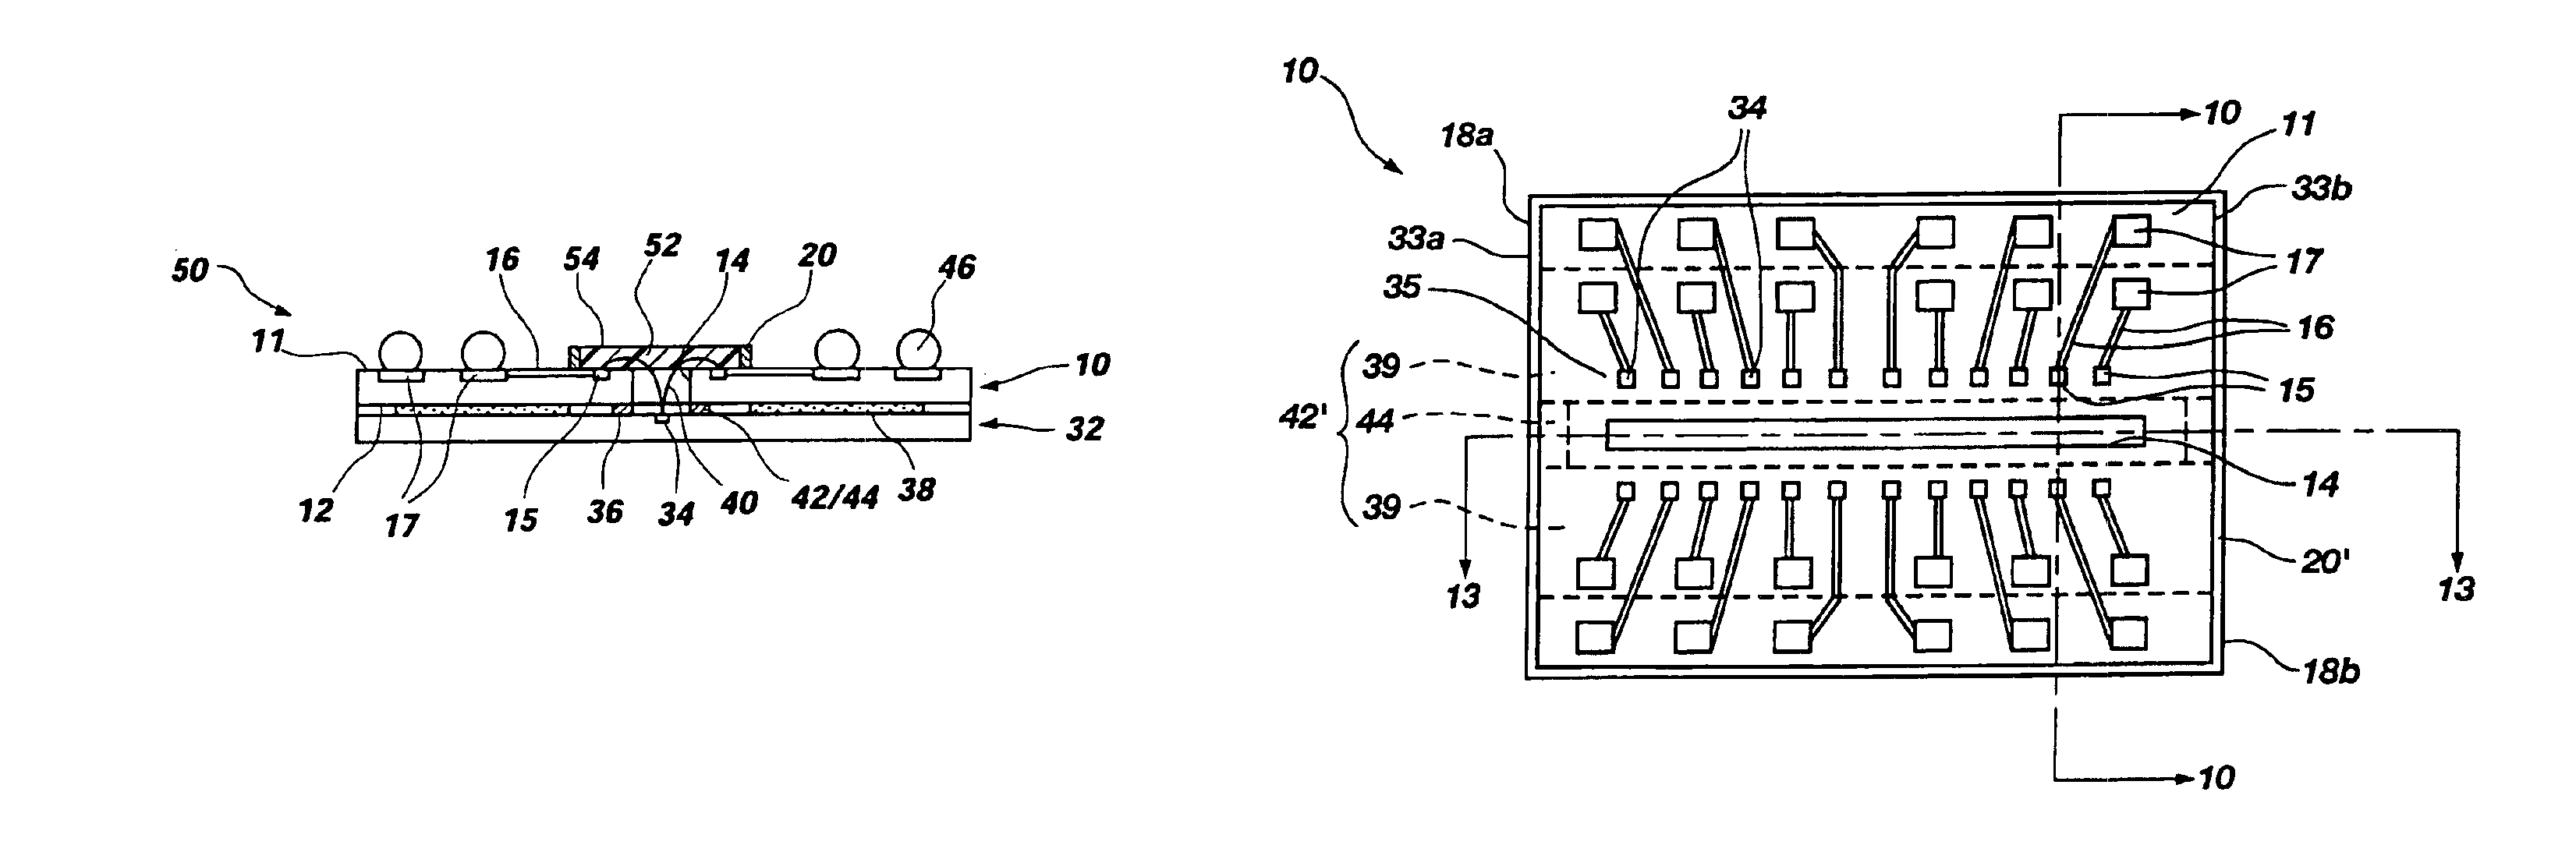 Method for fabricating interposers including upwardly protruding dams, semiconductor device assemblies including the interposers